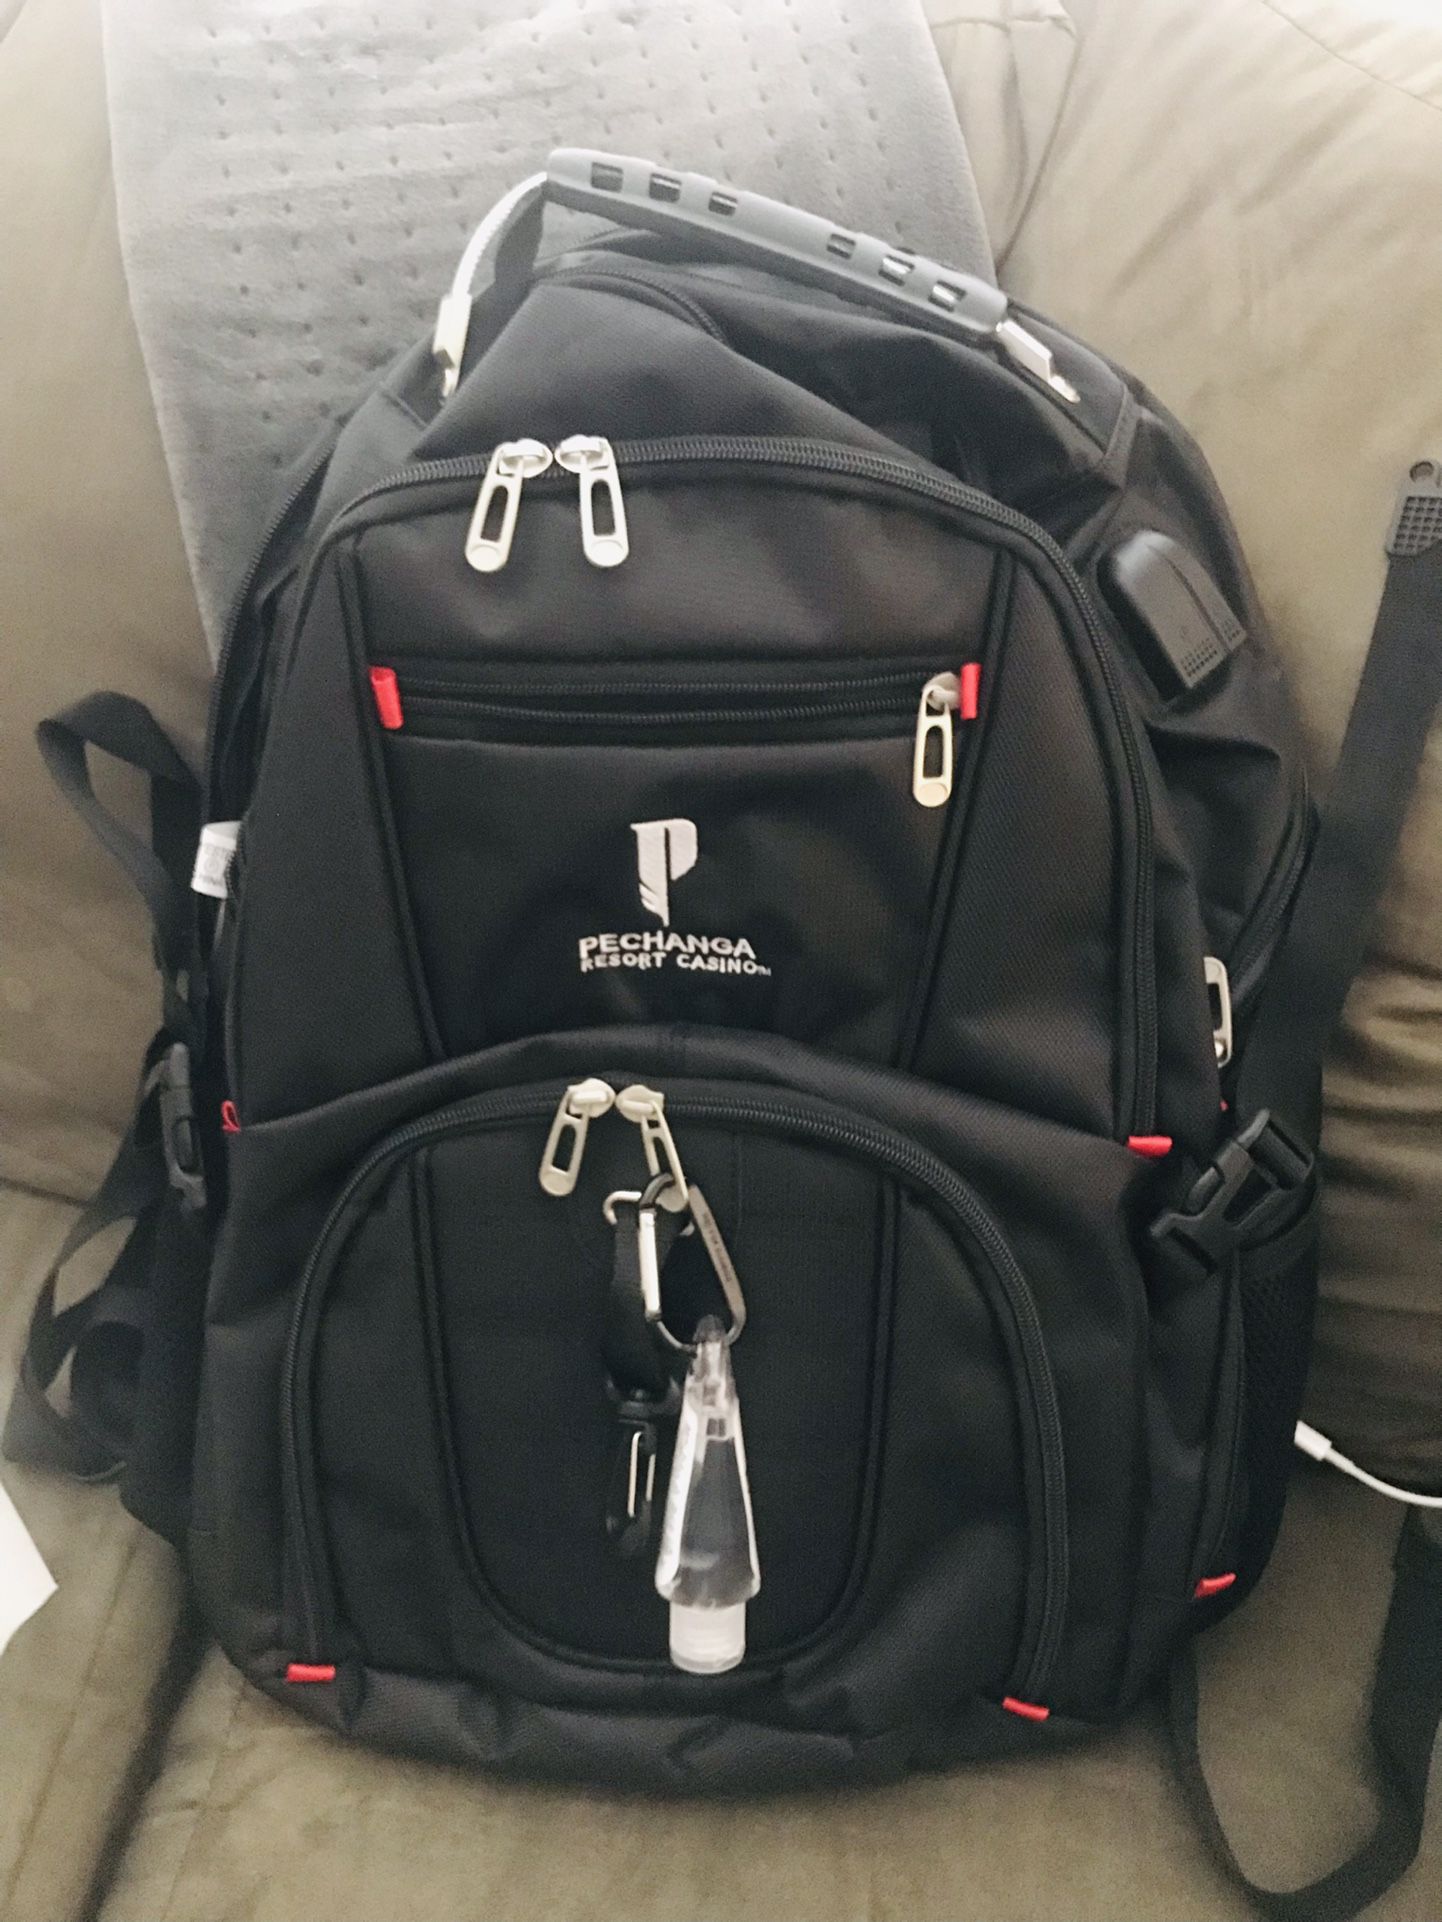 laptop  computer backpack new $50 